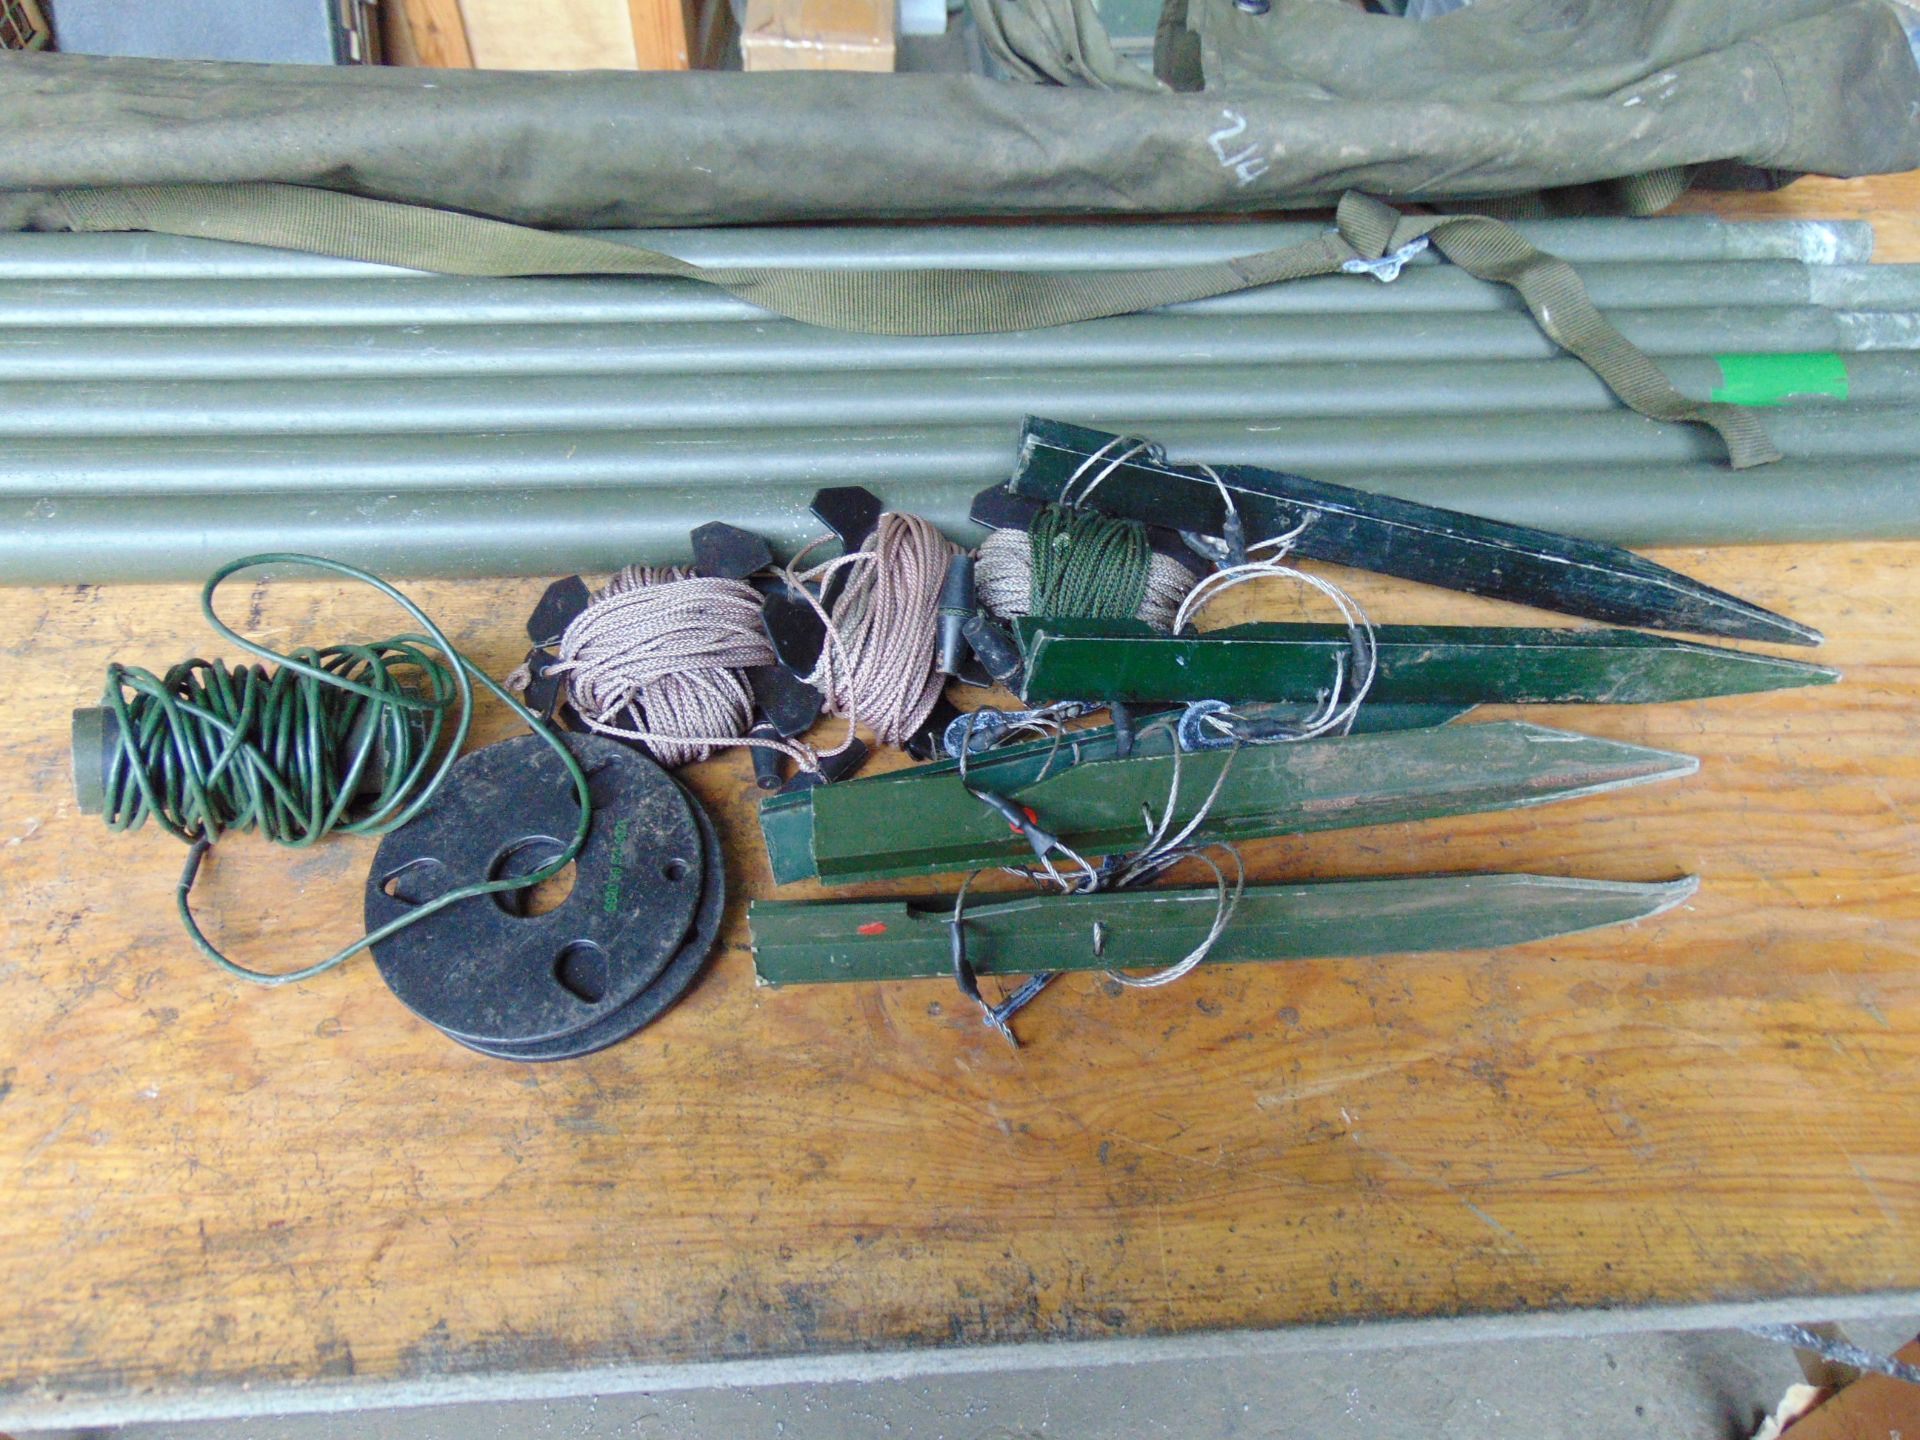 Clansman 6 Section Antenna Kit c/w Ropes, Pegs etc - Image 3 of 5